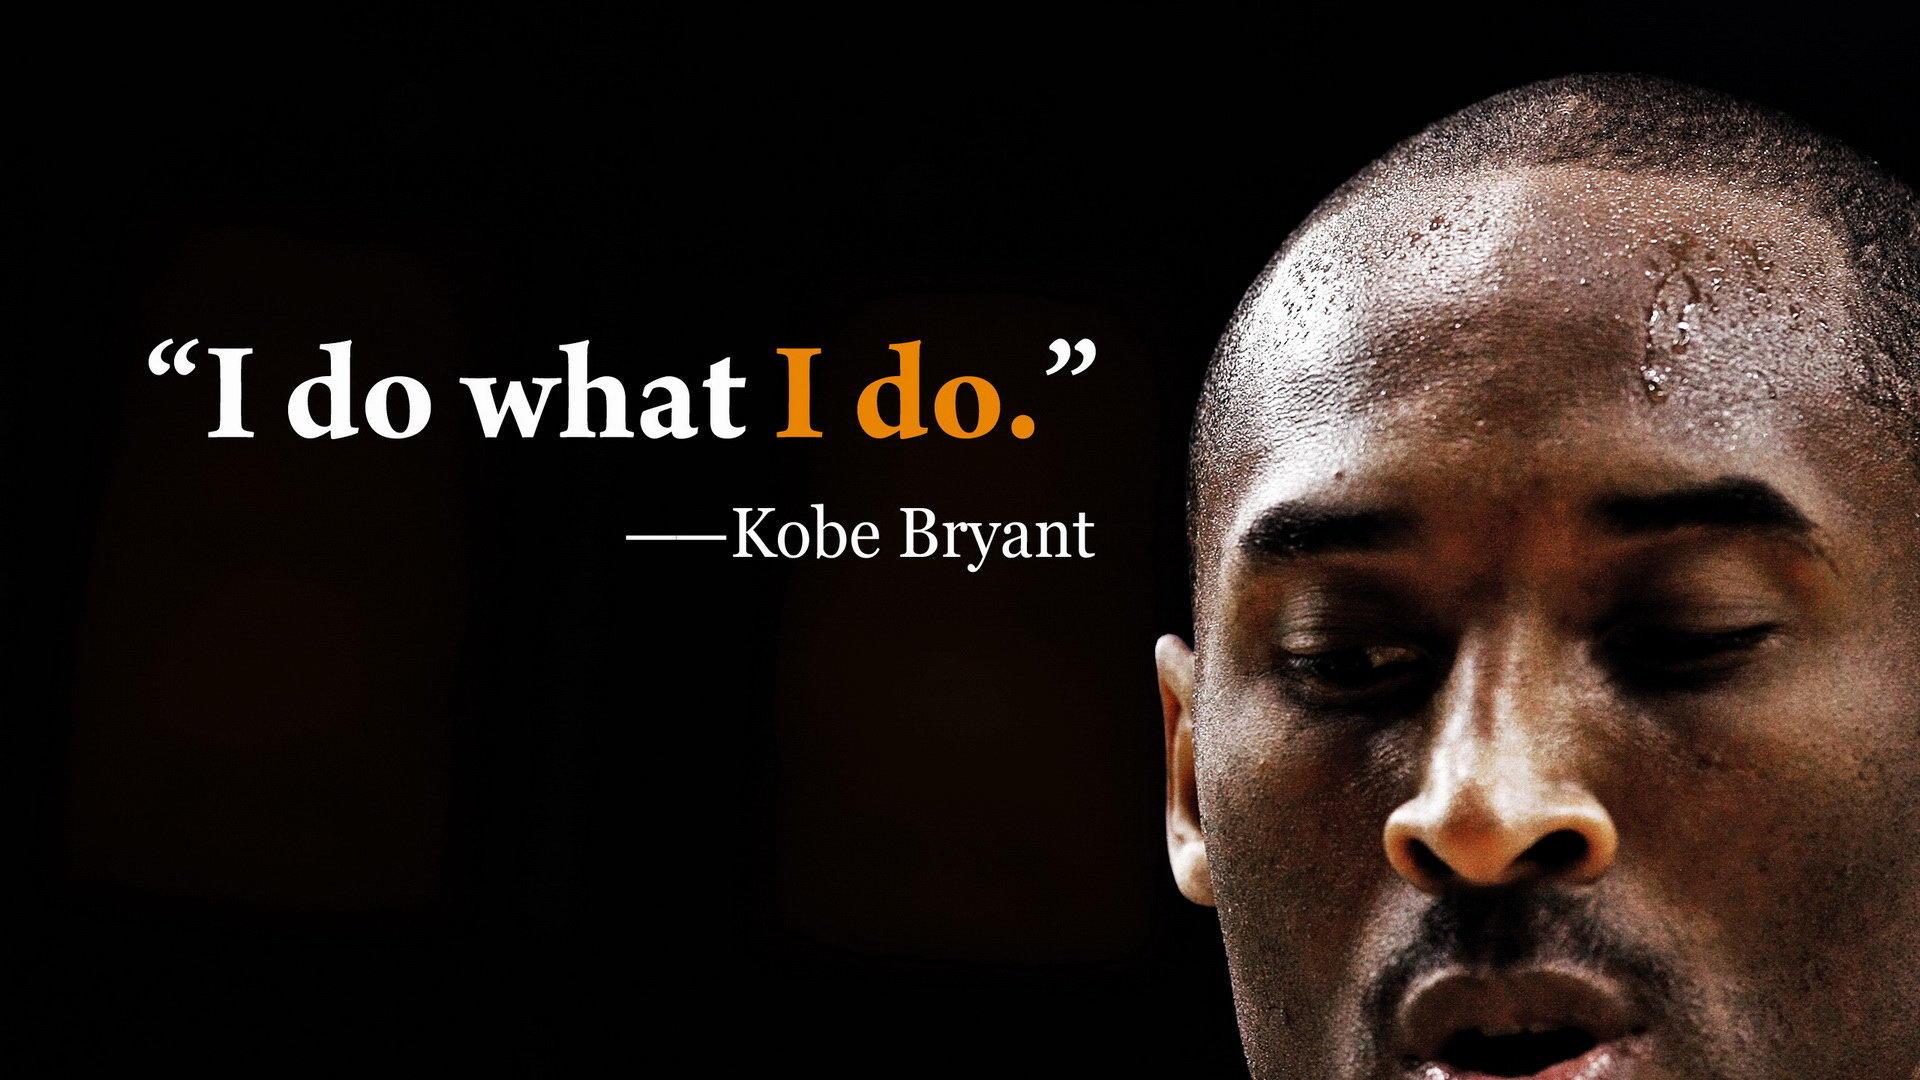 Quotes about Kobe Bryant 41 quotes